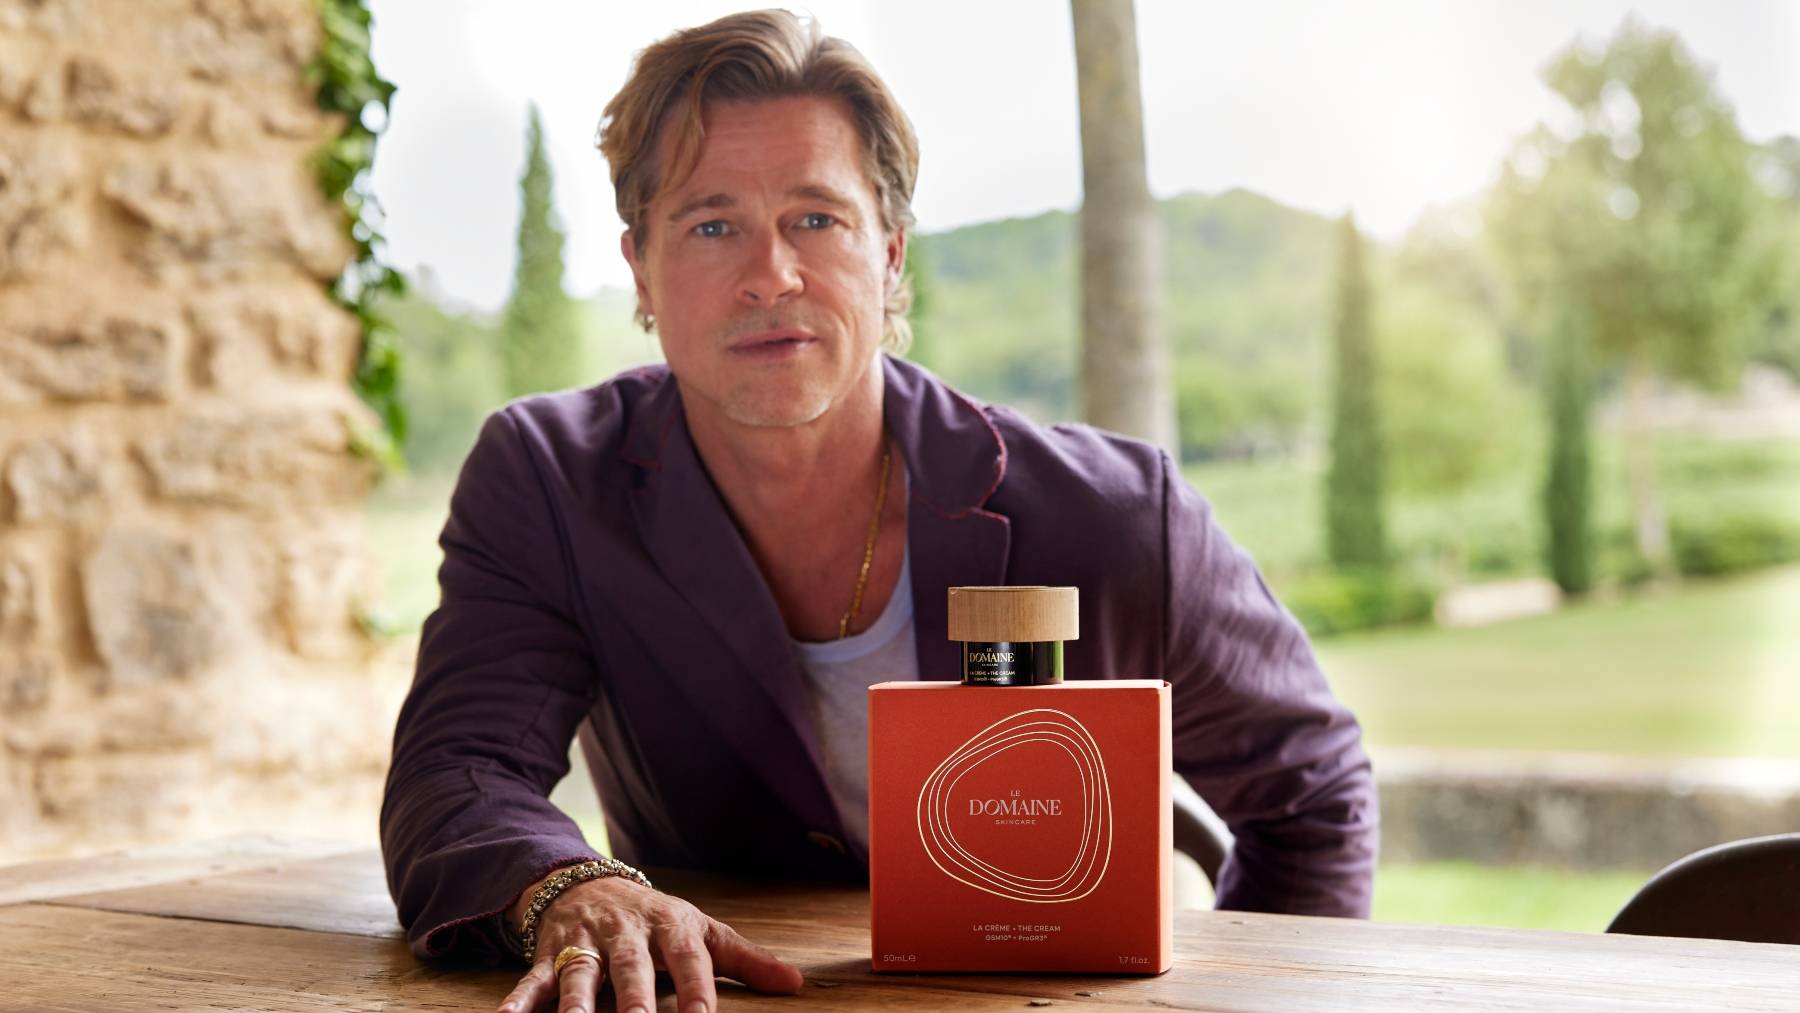 Brad Pitt launched his skin care line, Le Domaine, on Sept. 21.